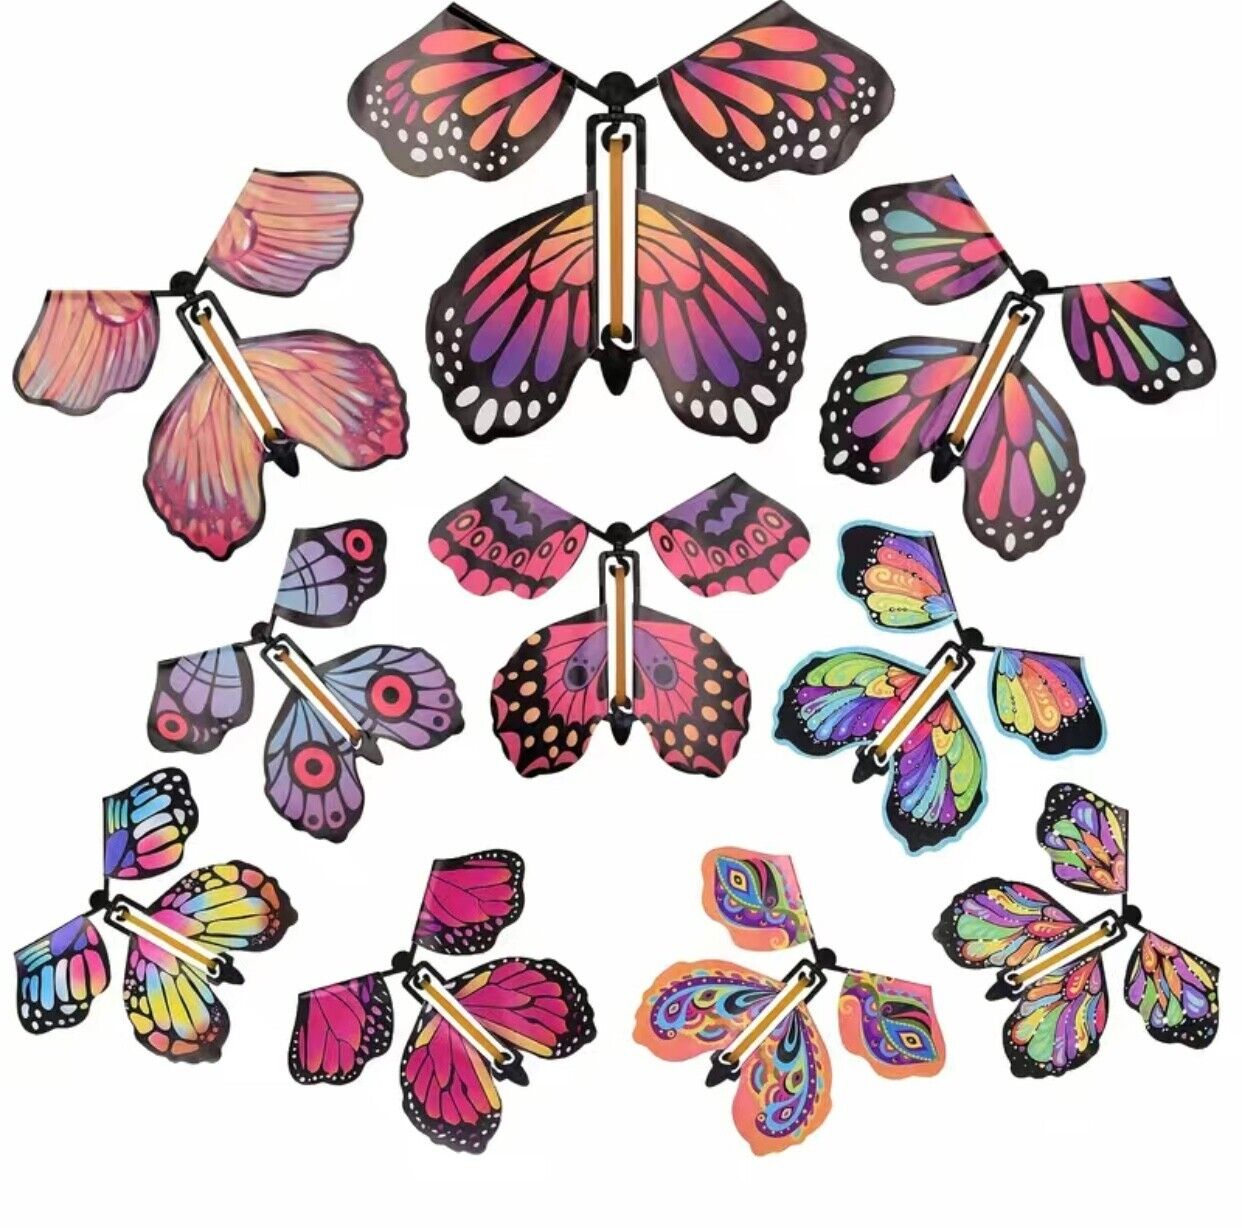 Magic Flying Butterfly Flutter Flyers Toys Random Color Wind Up Elastic Band 1pc